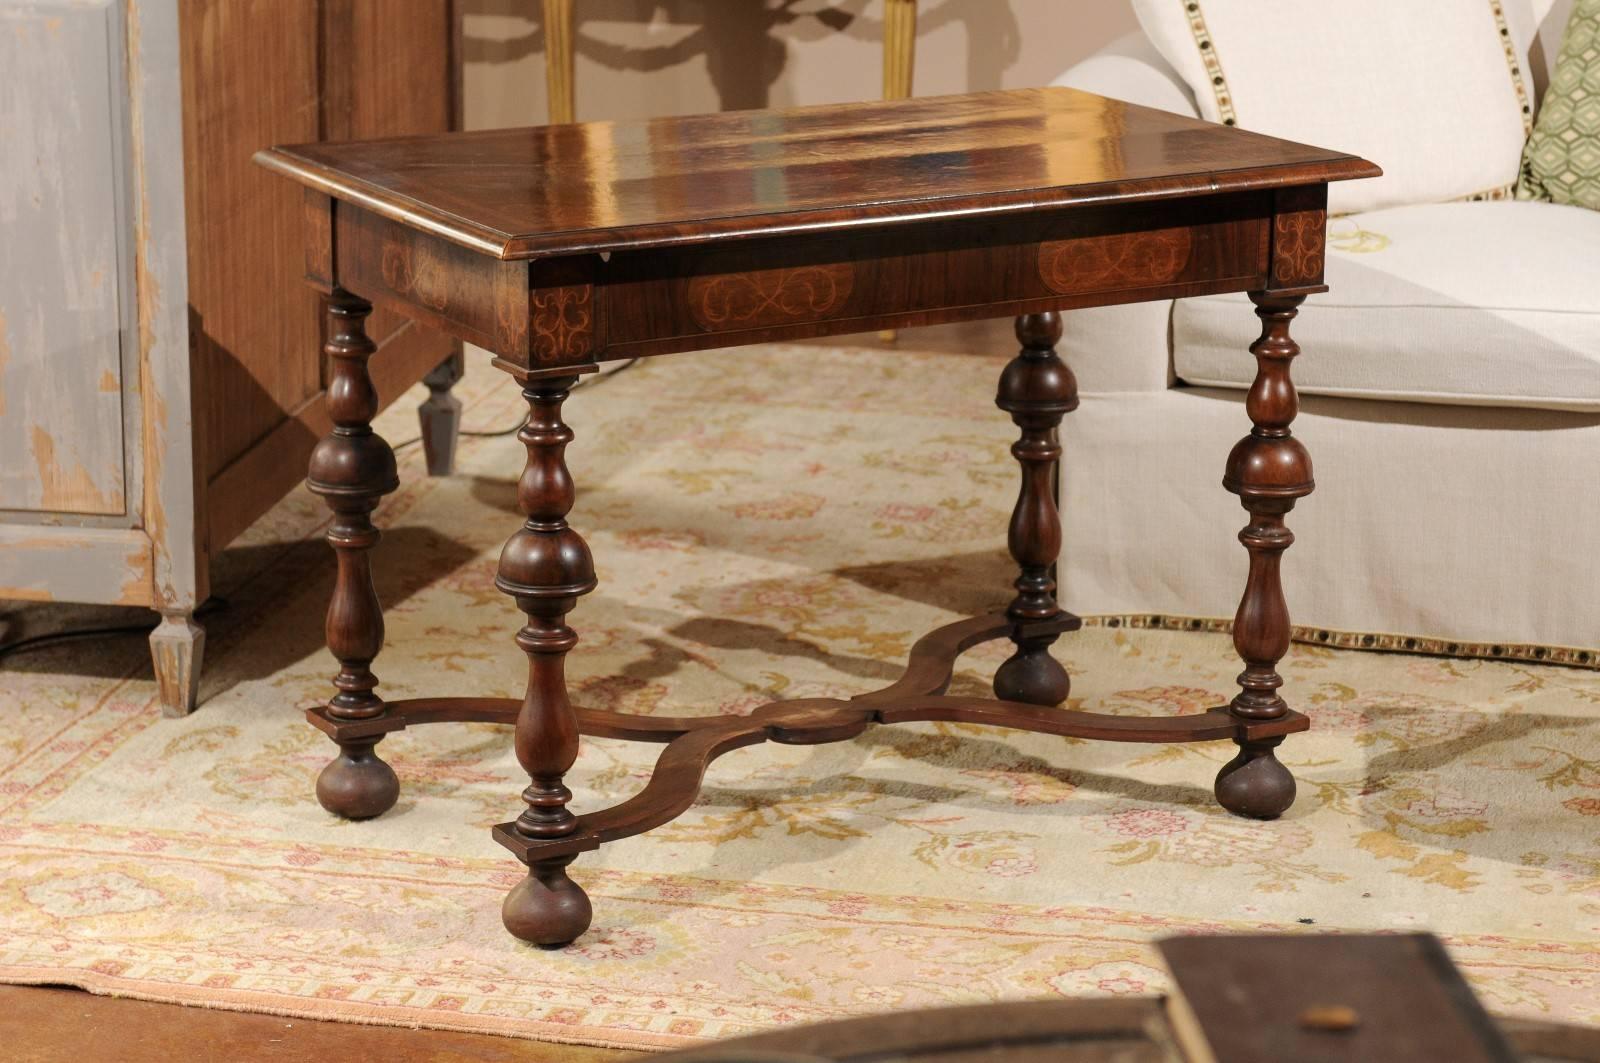 A beautiful William and Mary style marquetry inlaid walnut side or center table.
The turned legs with bun feet have an X-shaped stretcher. A very versatile piece. Lovely in any room.